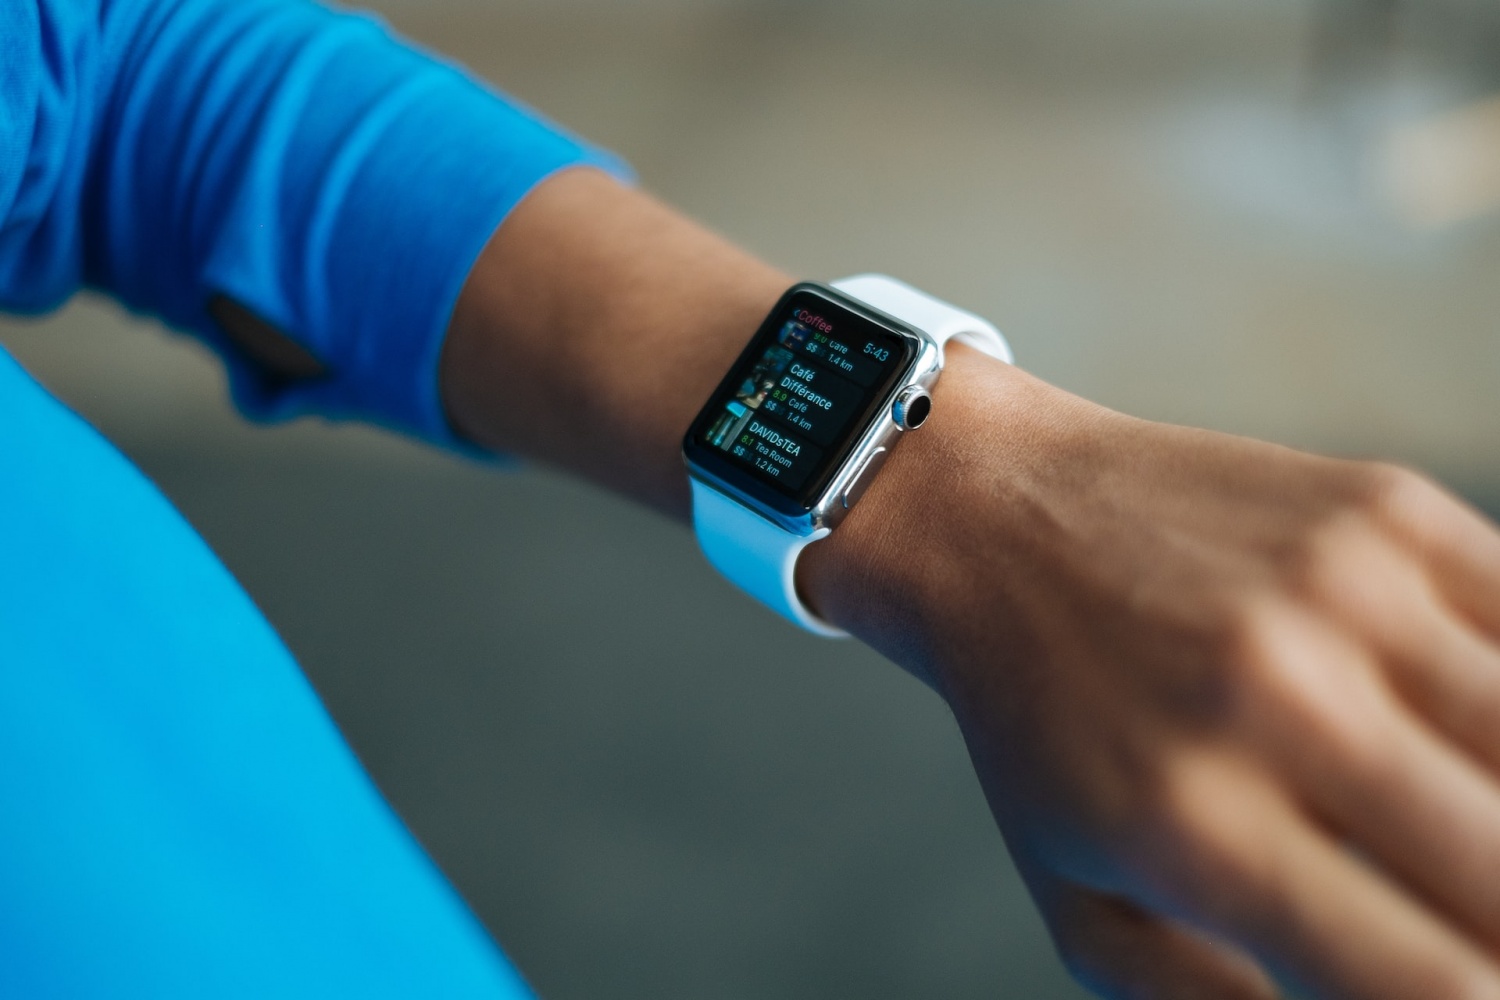 Wearables And Smart Home Devices May Pose Health Risks